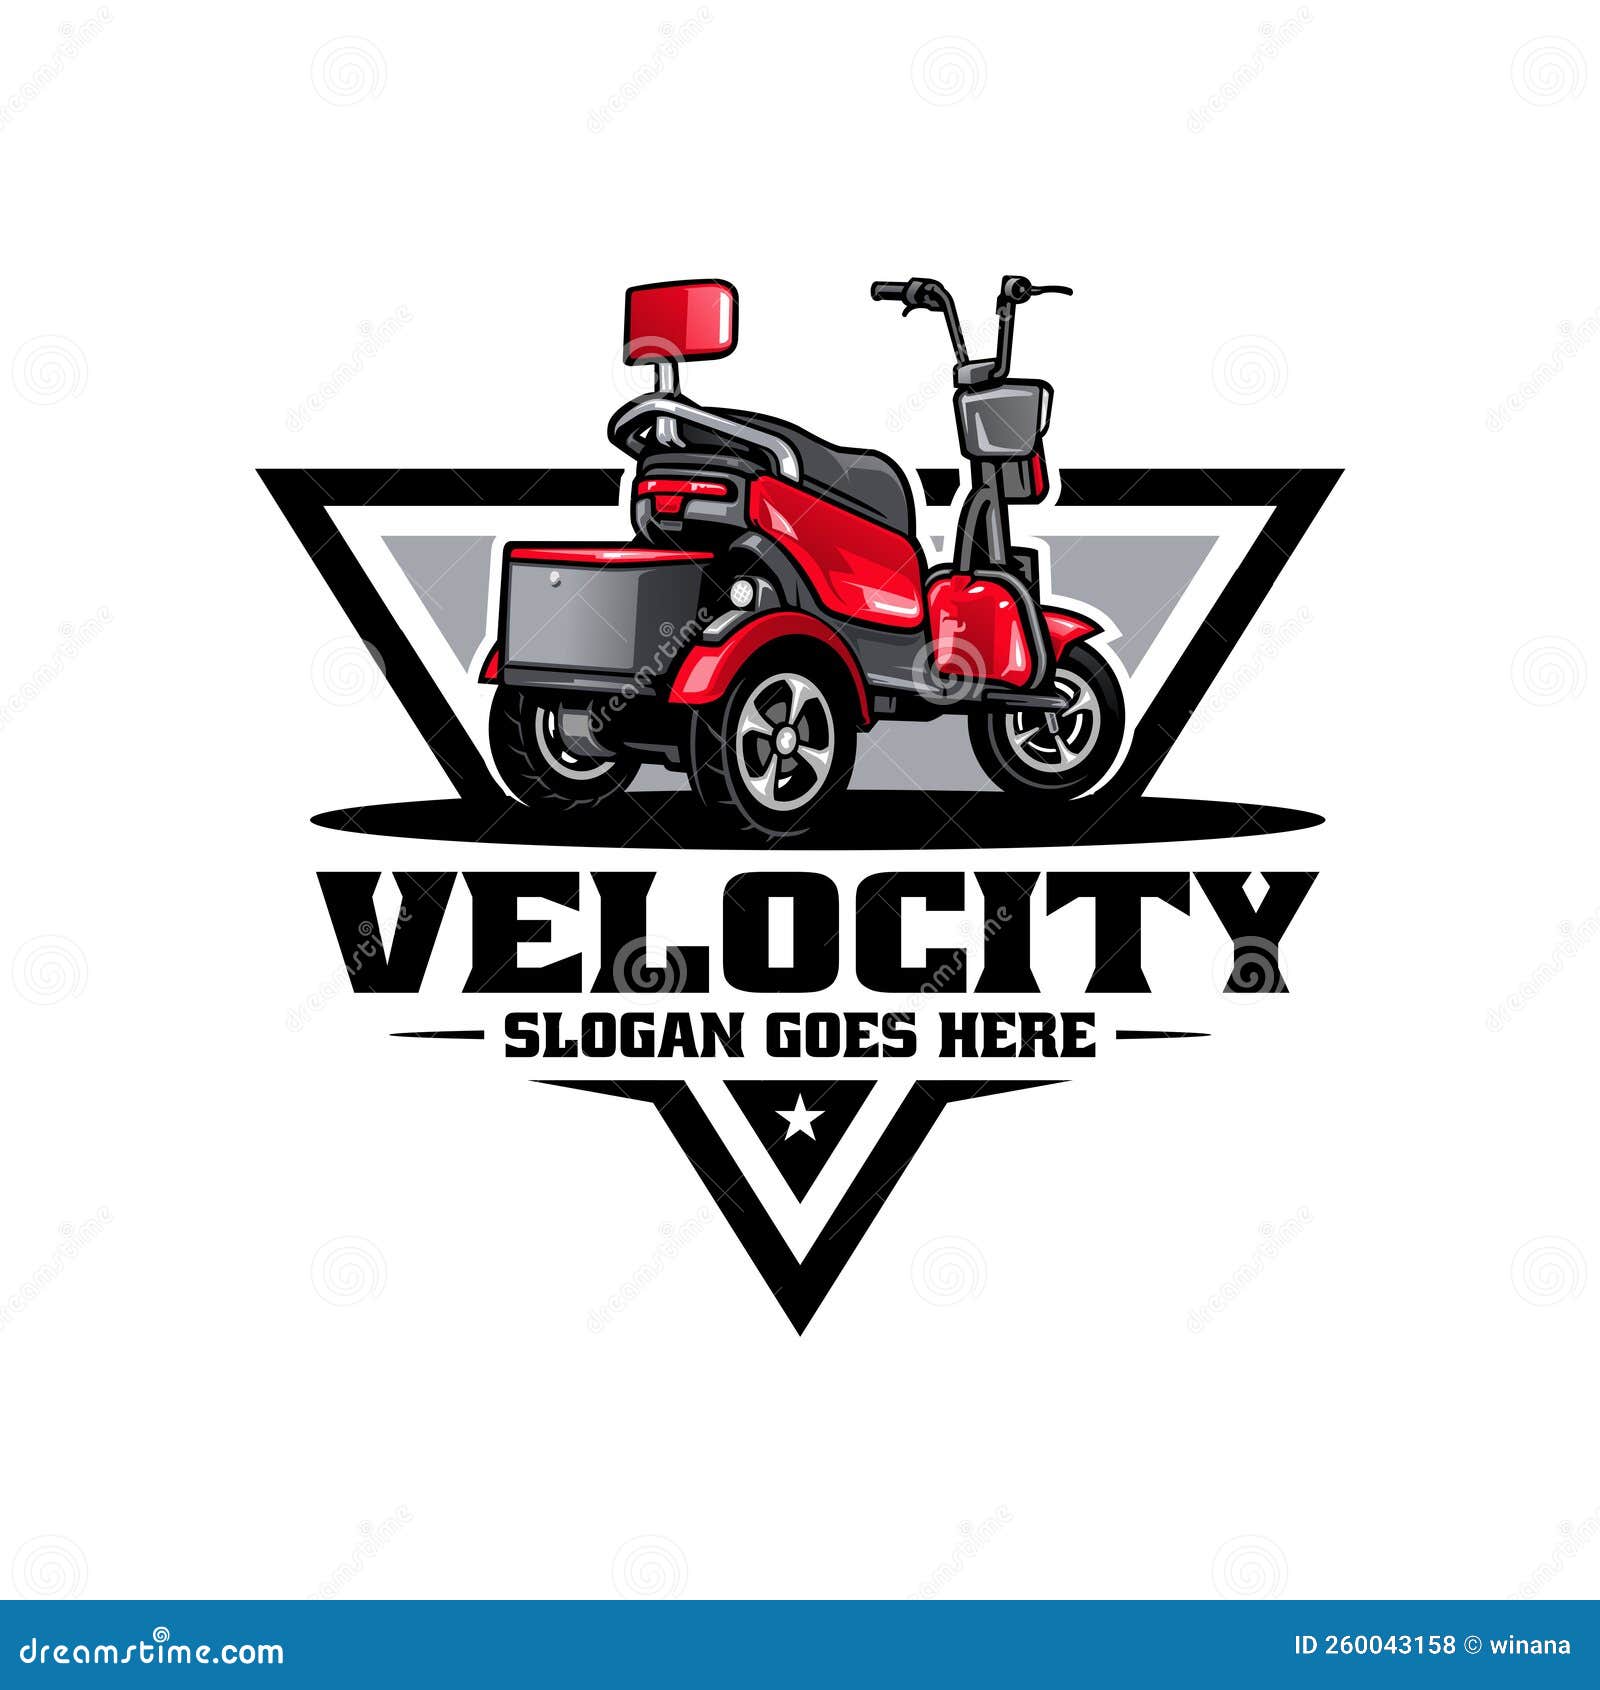 https://thumbs.dreamstime.com/z/best-company-logo-illustrations-sticker-t-shirt-design-electric-scooter-three-wheels-moped-logo-vector-260043158.jpg